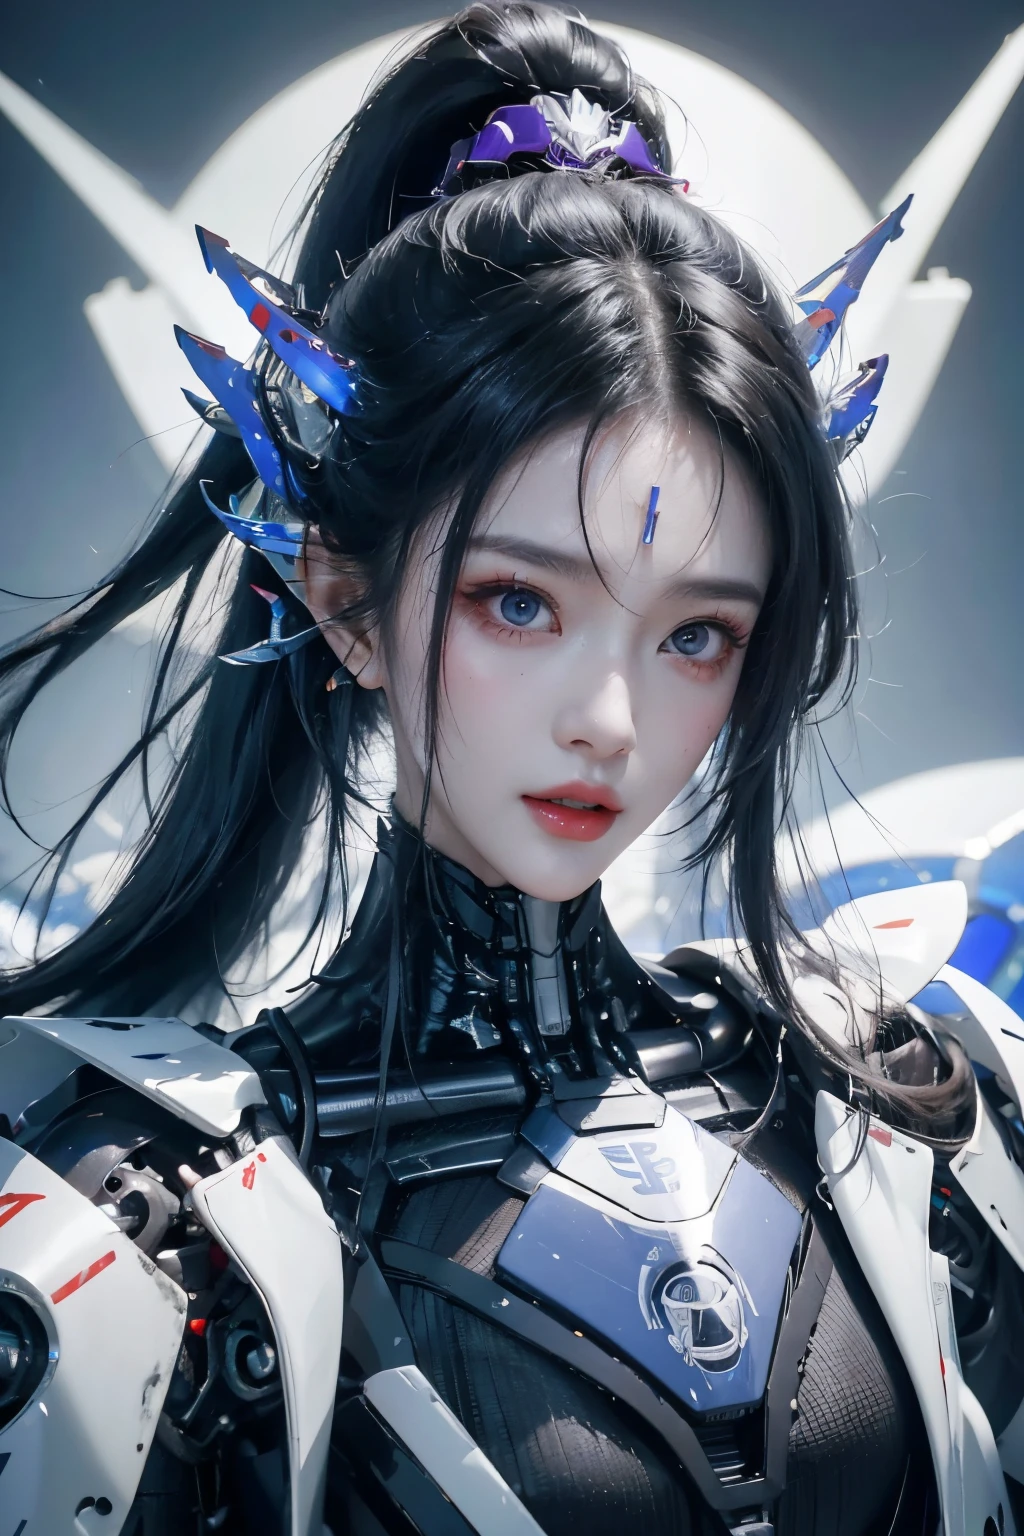 tmasterpiece,Best quality at best,A high resolution,8K,(portrait),(Close up of avatar),(RAW photogr),real photograph,digital photography,(cyberpunk queen),20-year-old girl,long ponytail hairstyle,By bangs,(Black and blue gradient hair),(Glowing red eyes),Devil Eyes,Serious and charming,Mechanical body,Green glowing electronic components,Red wires and tubes connect the body,Complex purple electronic texture,Weird technology symbols,Black round forehead symbol,Luxurious mechanical crown,Keep your mouth shut,(Mechanical Woman),Photo pose,cyber punk perssonage,Future Style,gray world background,oc render reflection texture